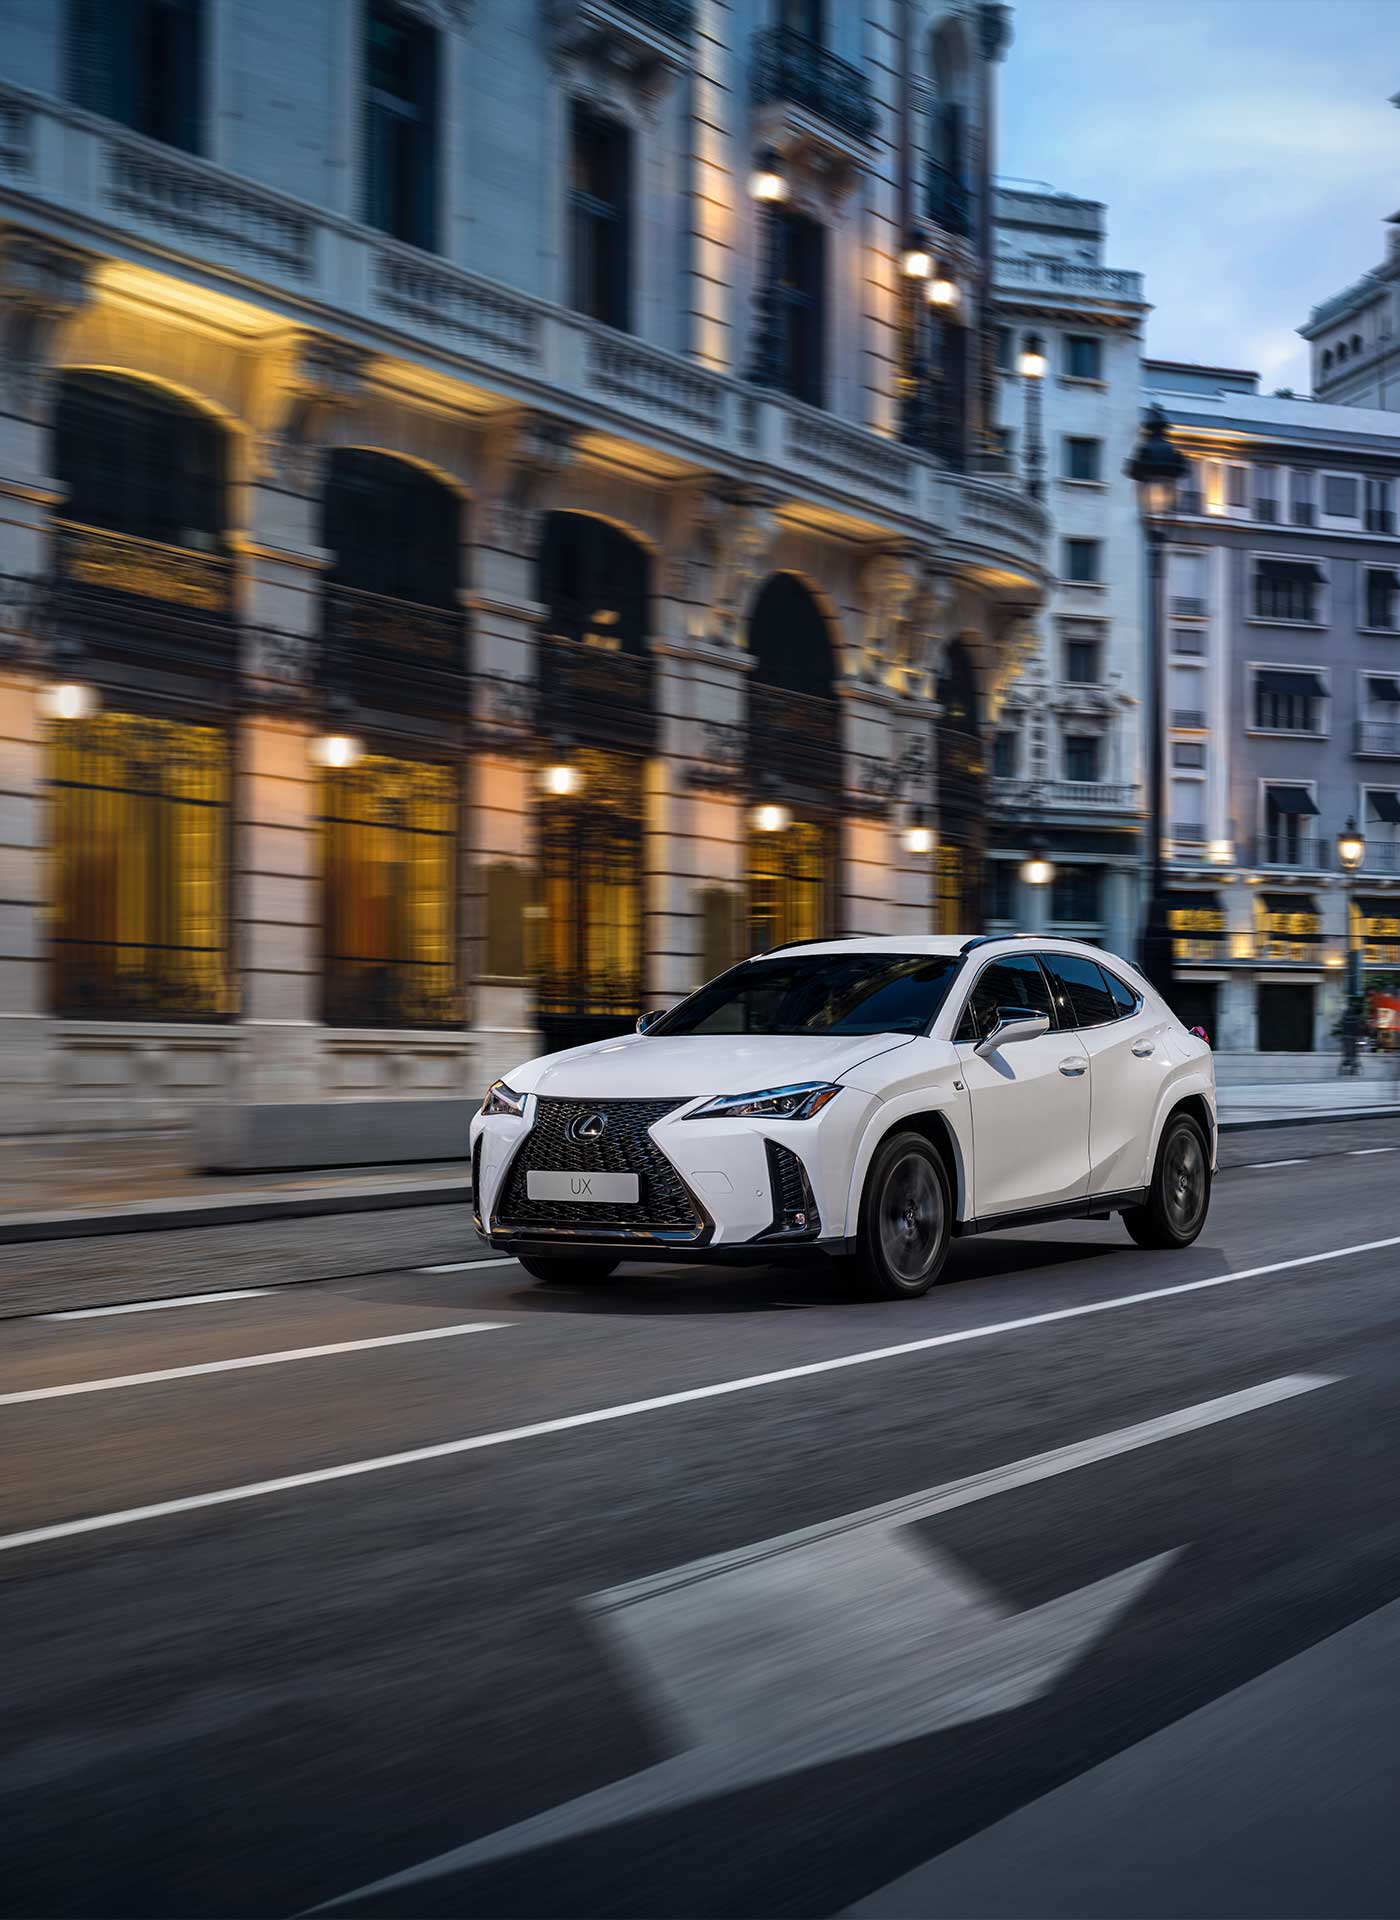 A white 2022 Lexus UX drives down a city street lined with heritage buildings